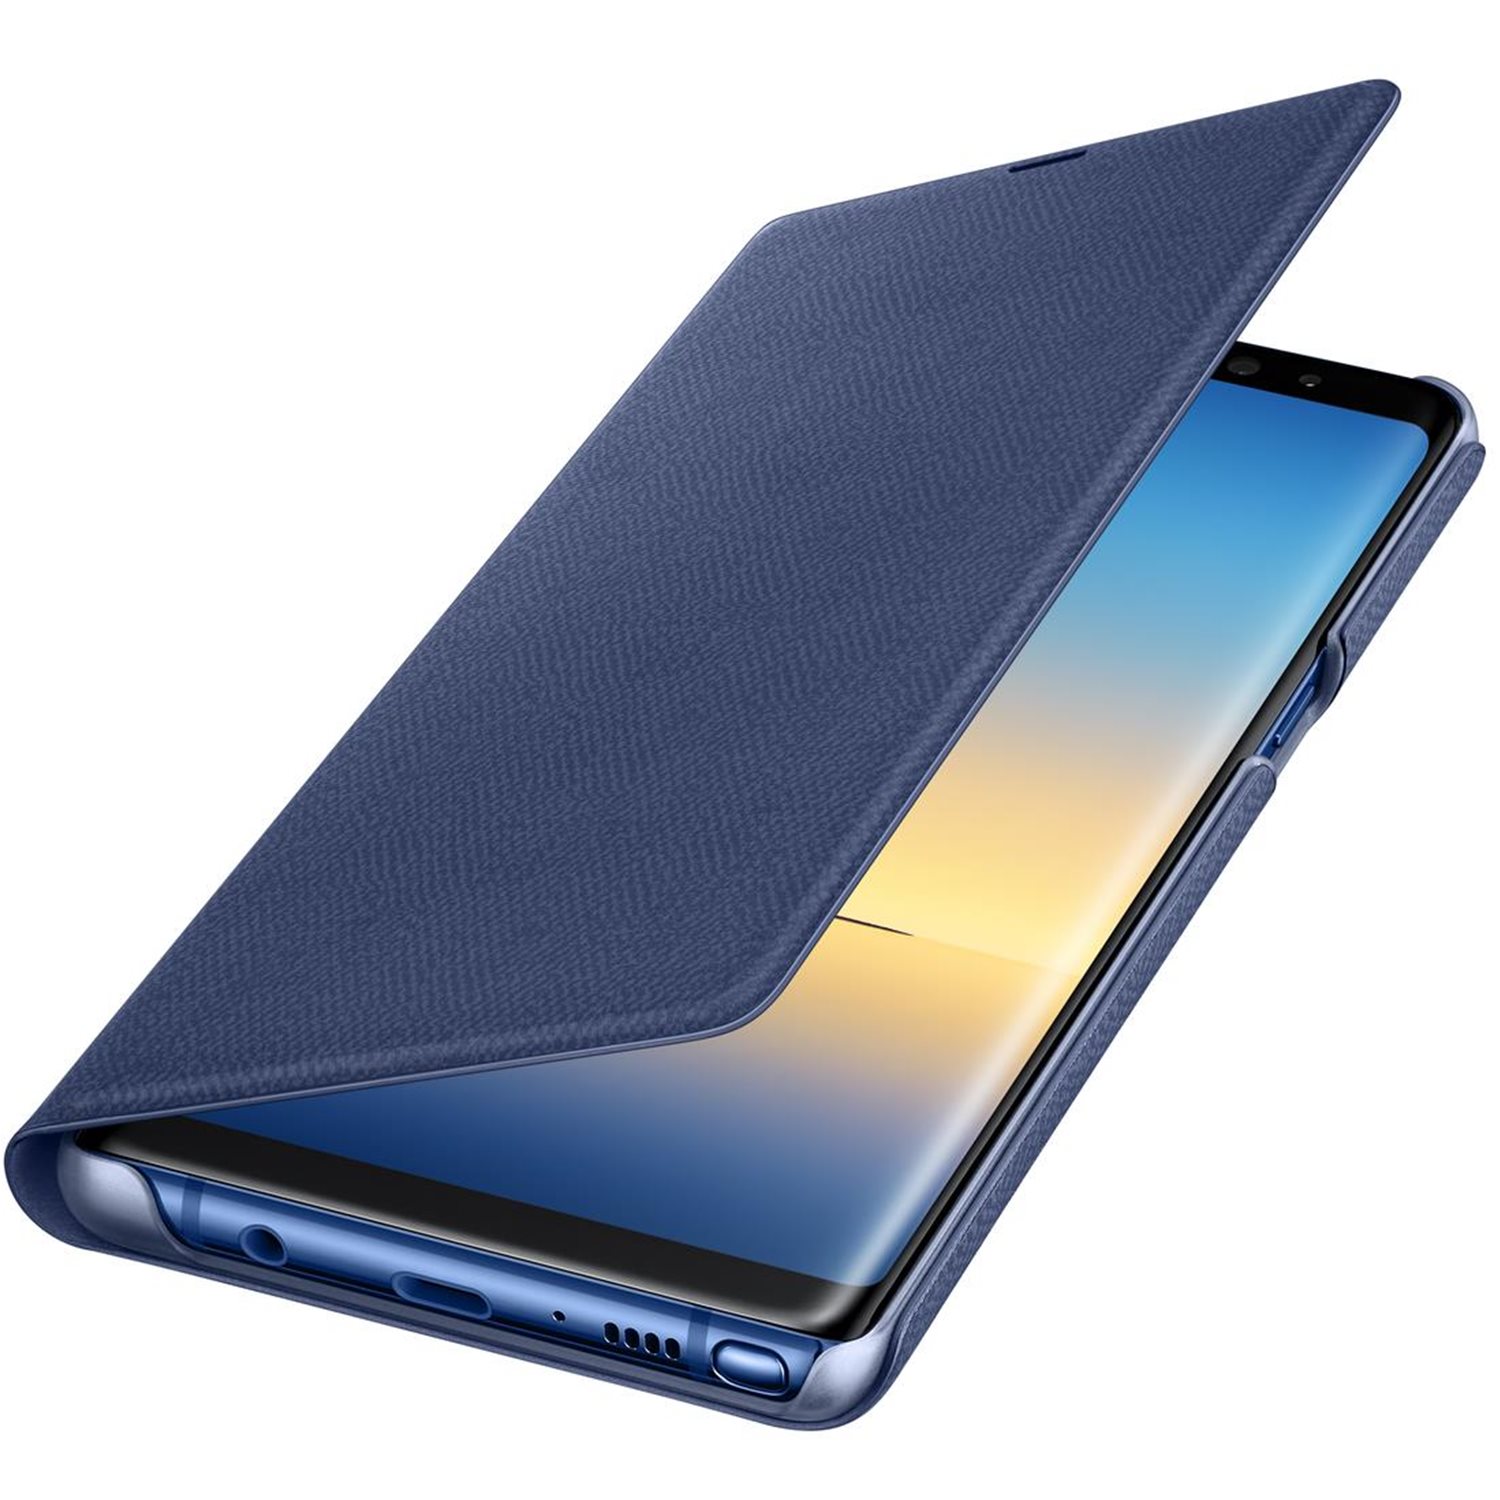 Official Samsung Galaxy Note 8 LED View Cover Case - Deep Blue